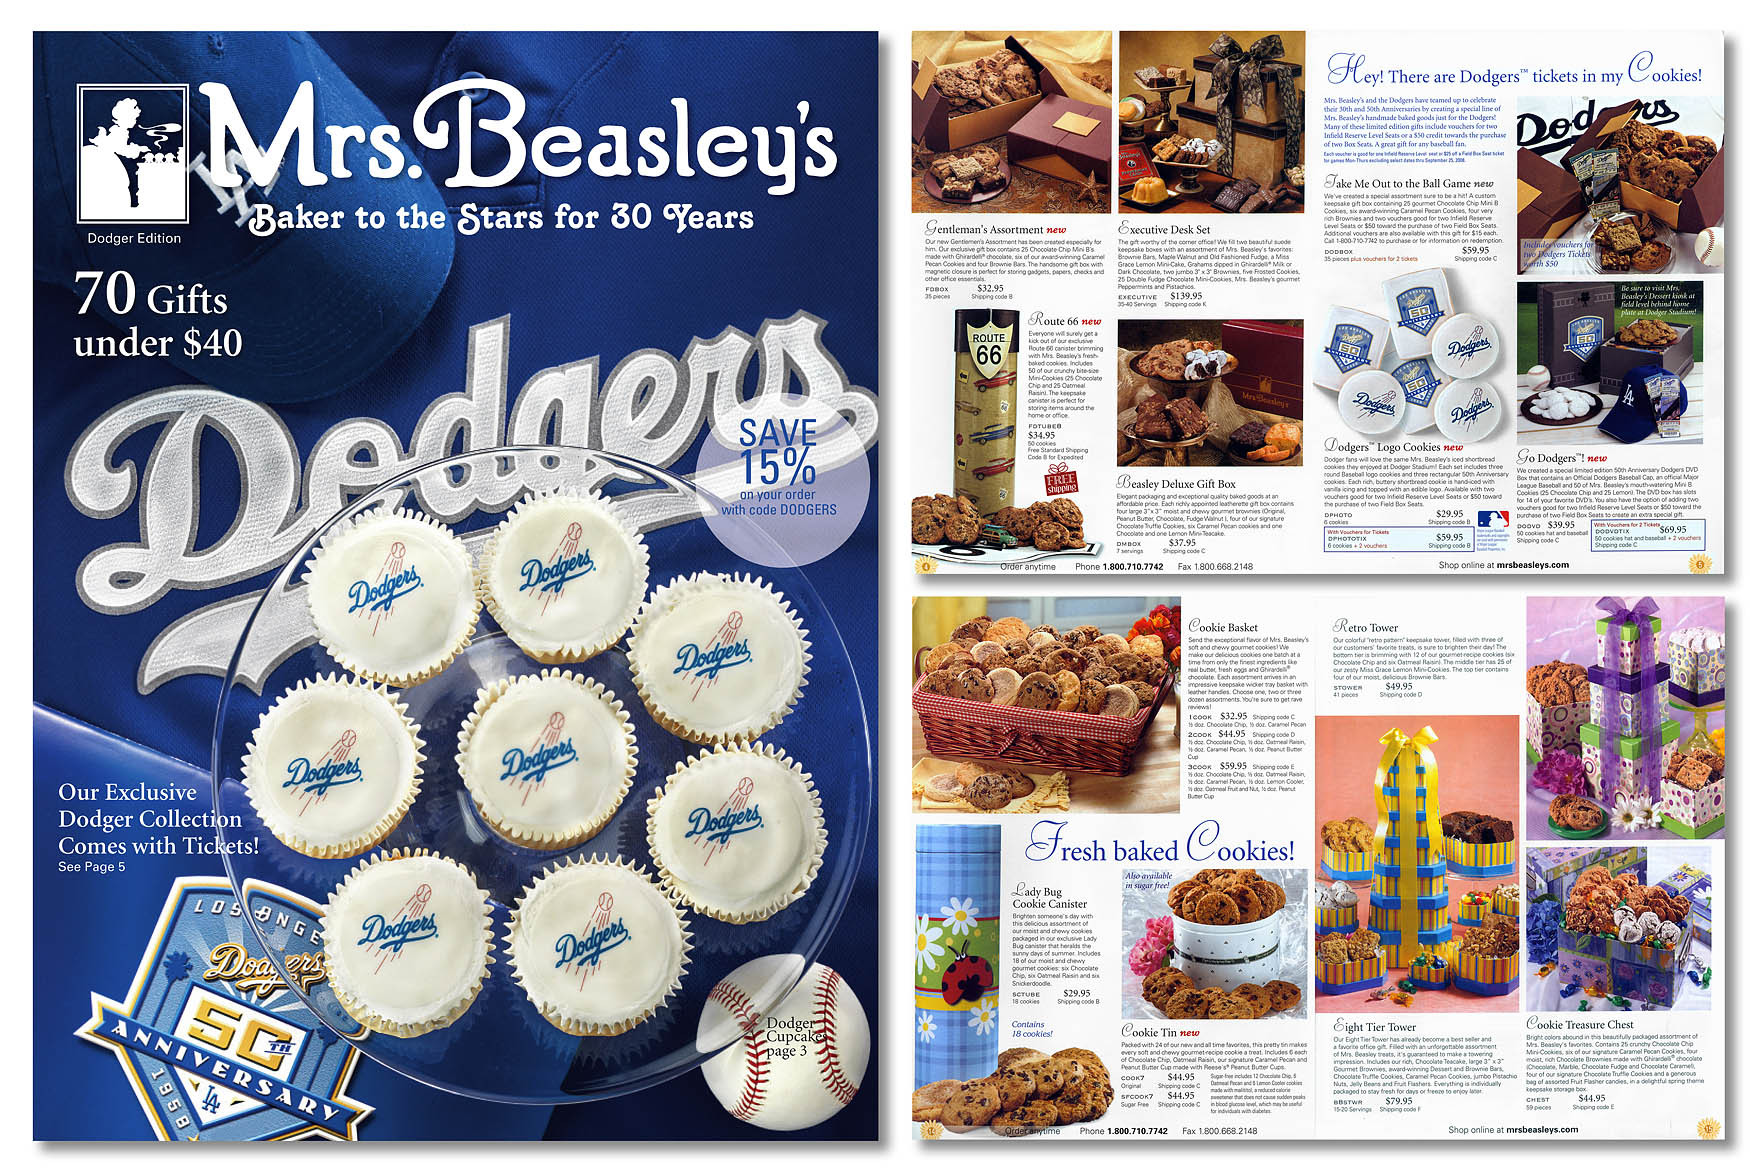 dodgers_Cover-Spreads_flat1750pix